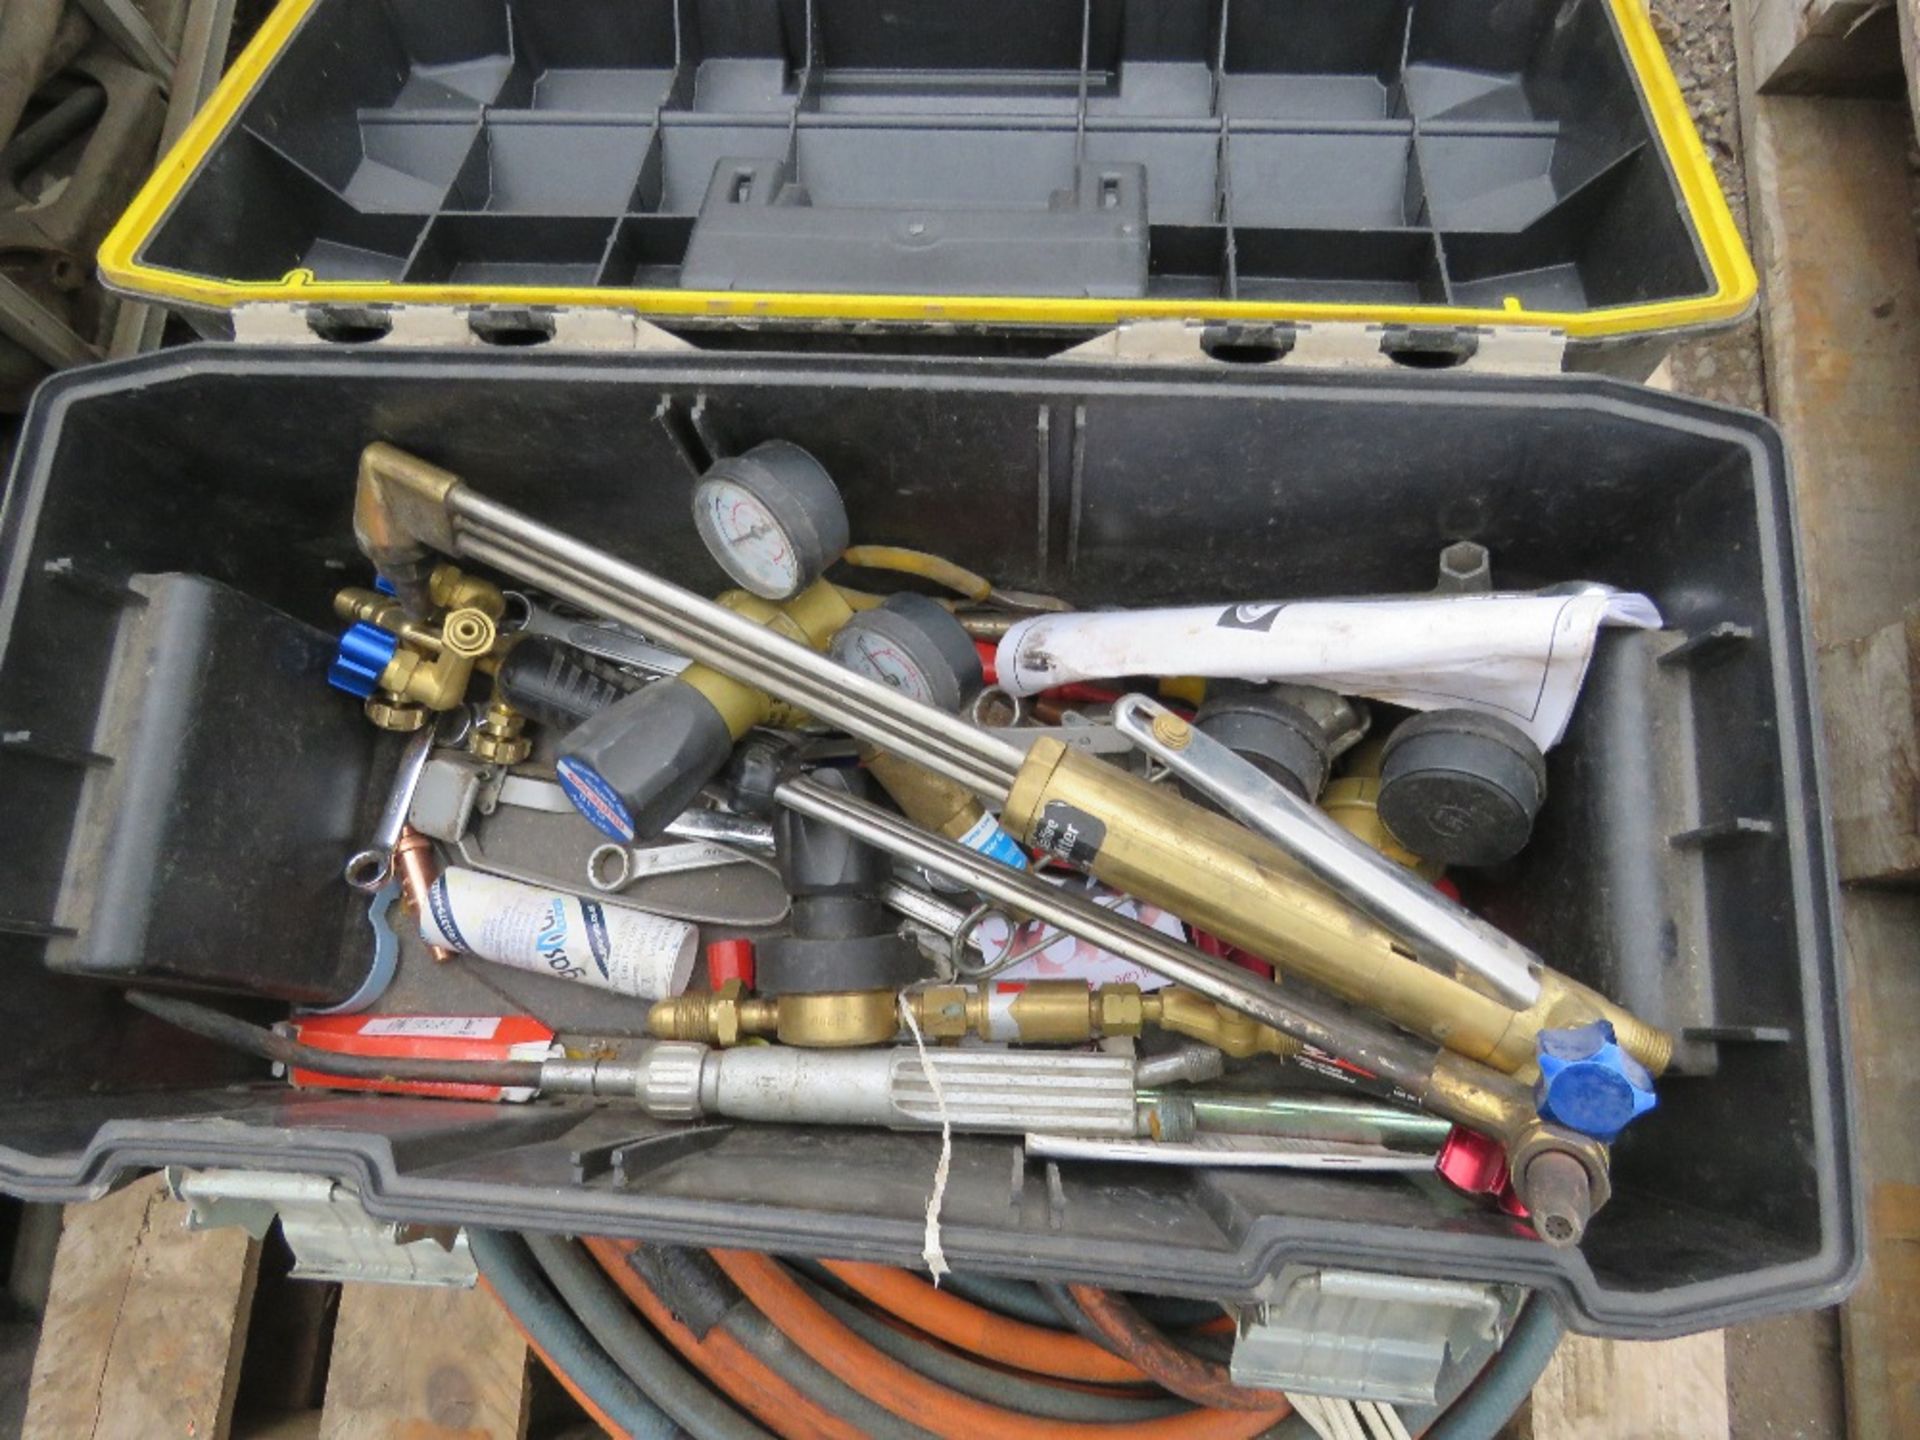 GAS CUTTING HOSES AND EQUIPMENT. SOURCED FROM COMPANY LIQUIDATION. - Image 2 of 5